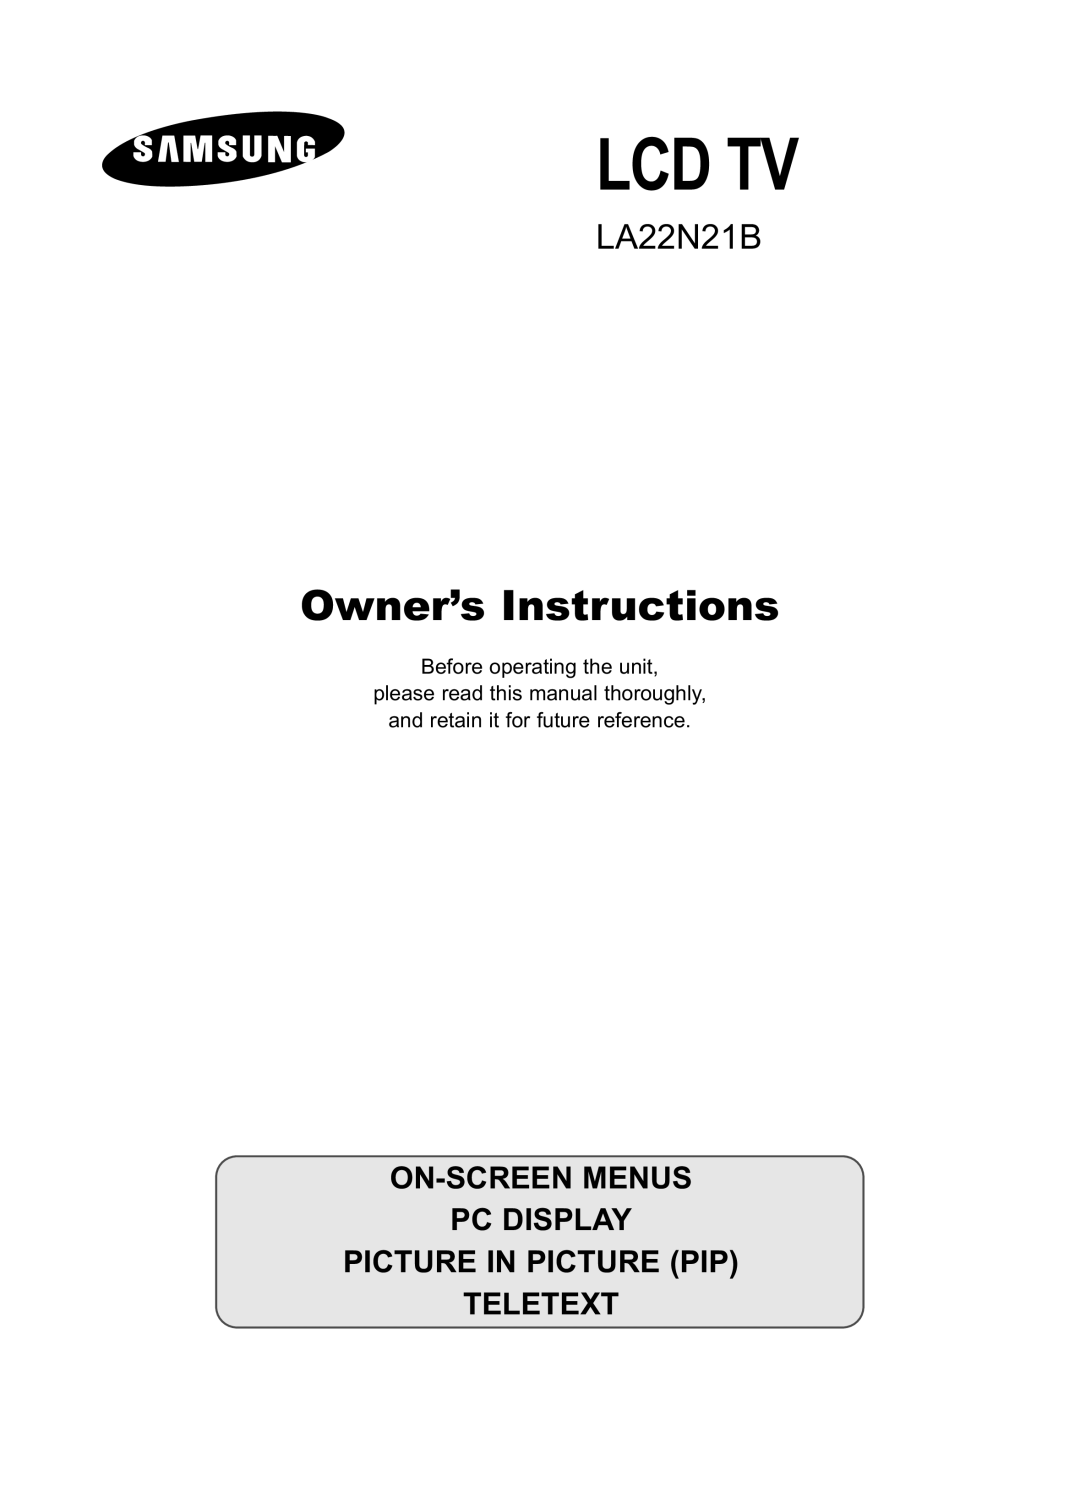 Samsung LA22N21B manual Lcd Tv, Owner’s Instructions, On-Screen Menus Pc Display Picture In Picture Pip Teletext 